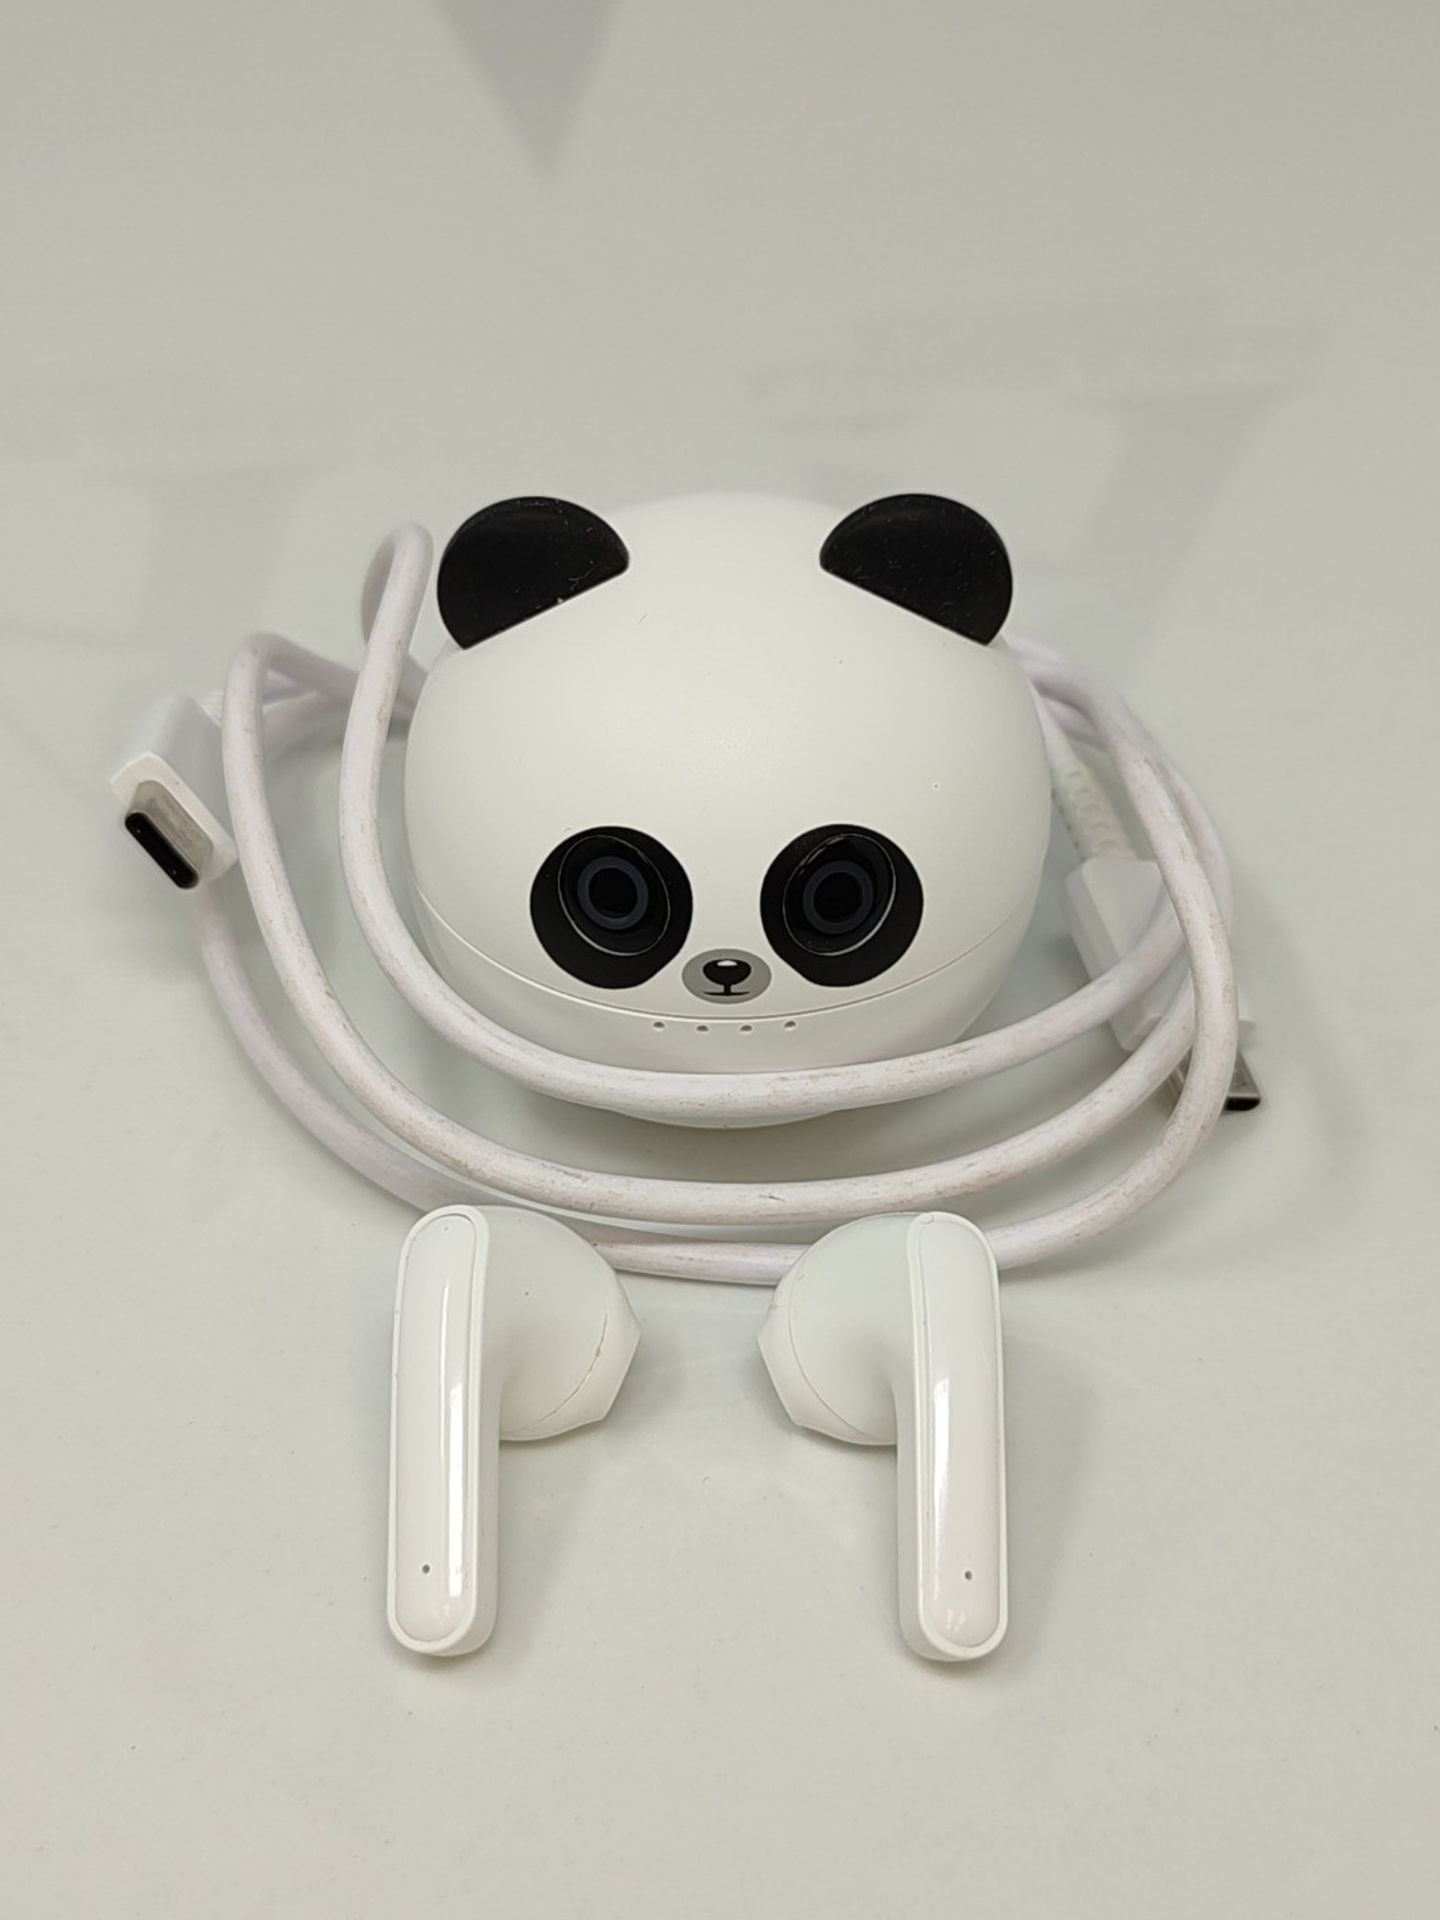 Amaface Bluetooth earphones for children, IPX5 waterproof, for iPhone, Android, wirele - Image 2 of 2